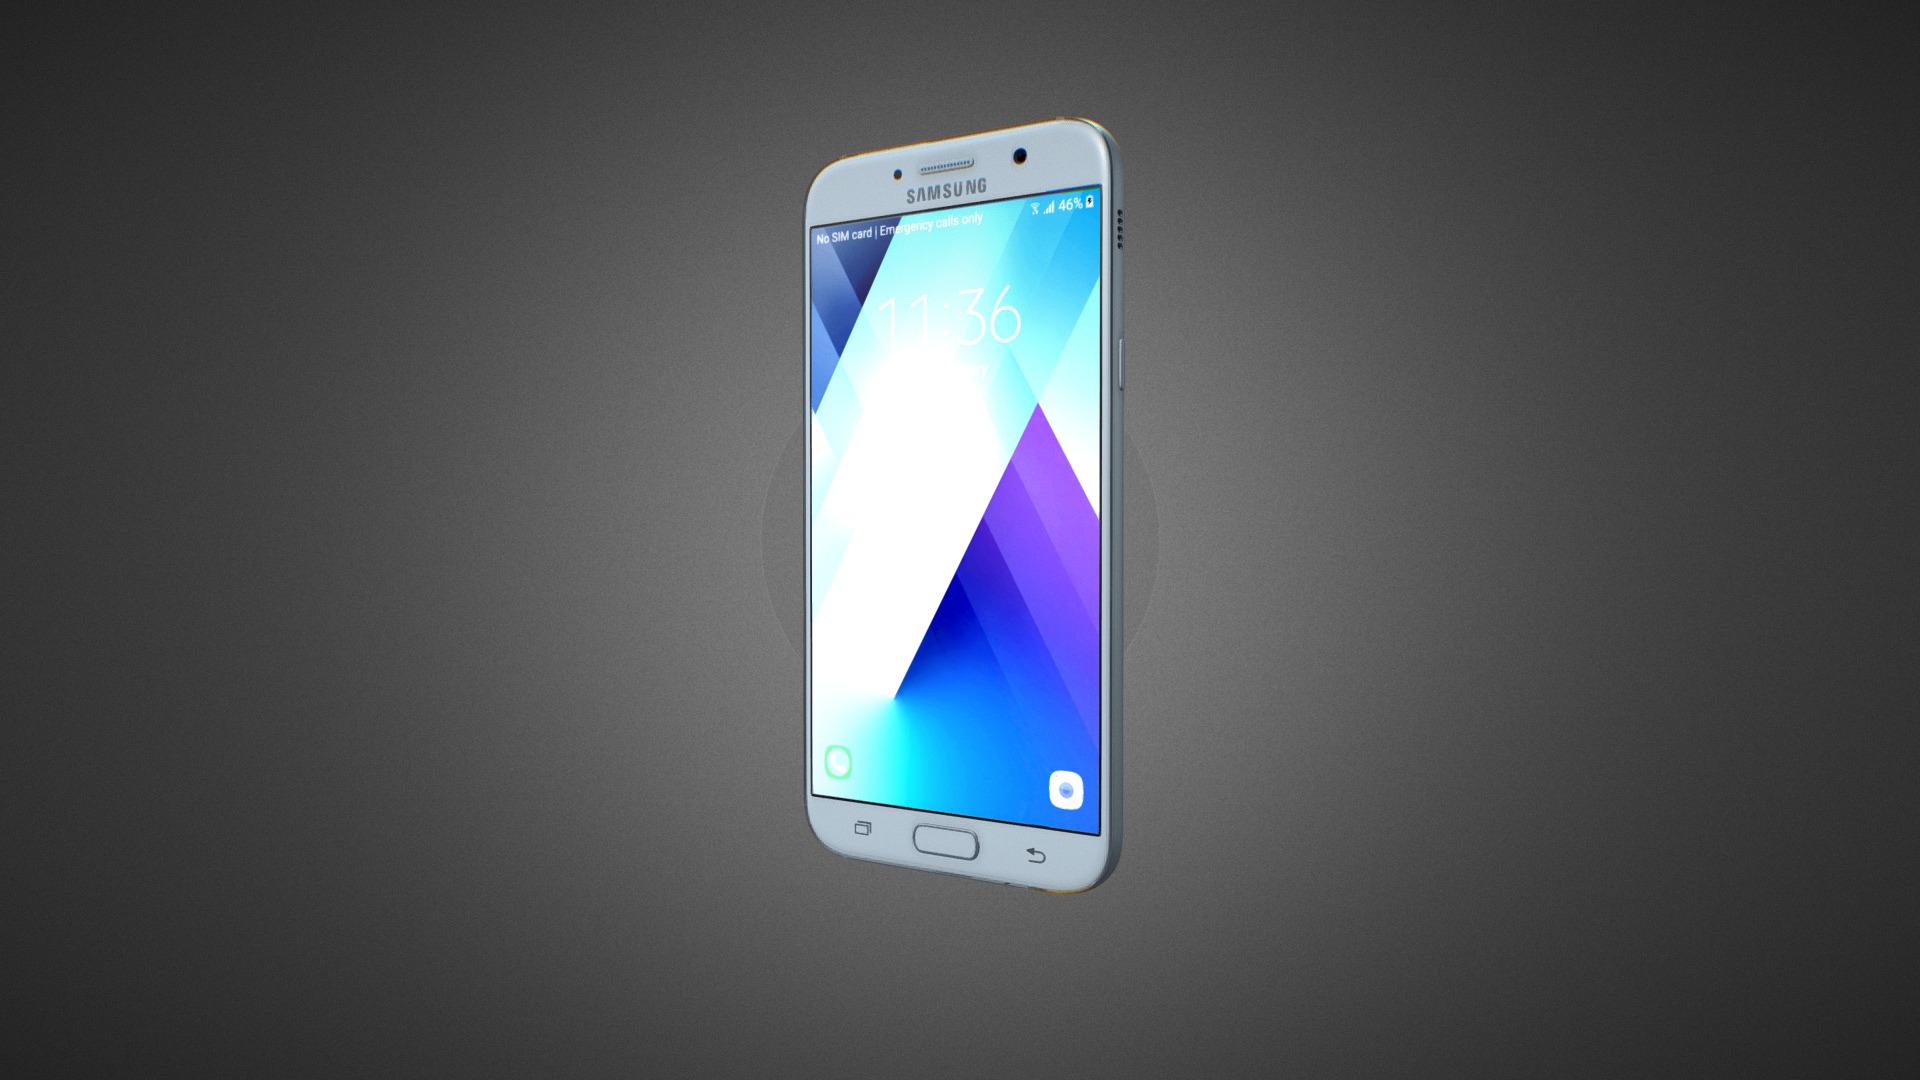 3D model Samsung Galaxy A7 2017 for Element 3D - This is a 3D model of the Samsung Galaxy A7 2017 for Element 3D. The 3D model is about a cell phone on a table.